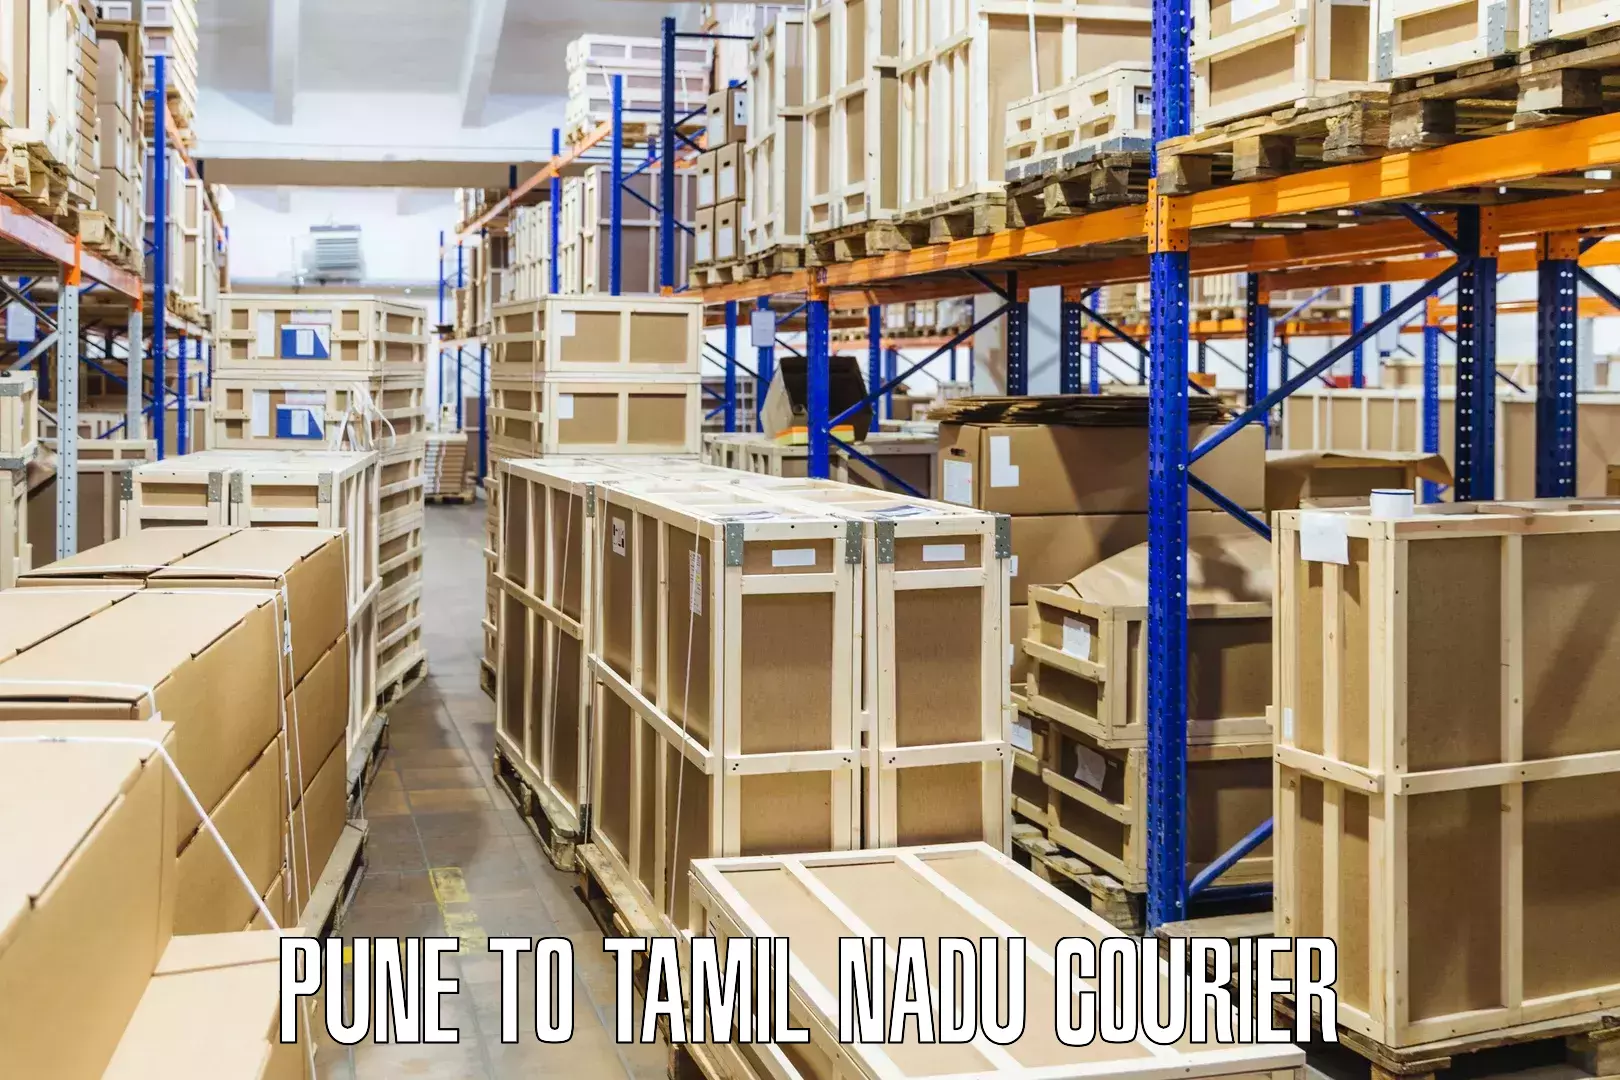 24-hour courier services Pune to Chennai Port